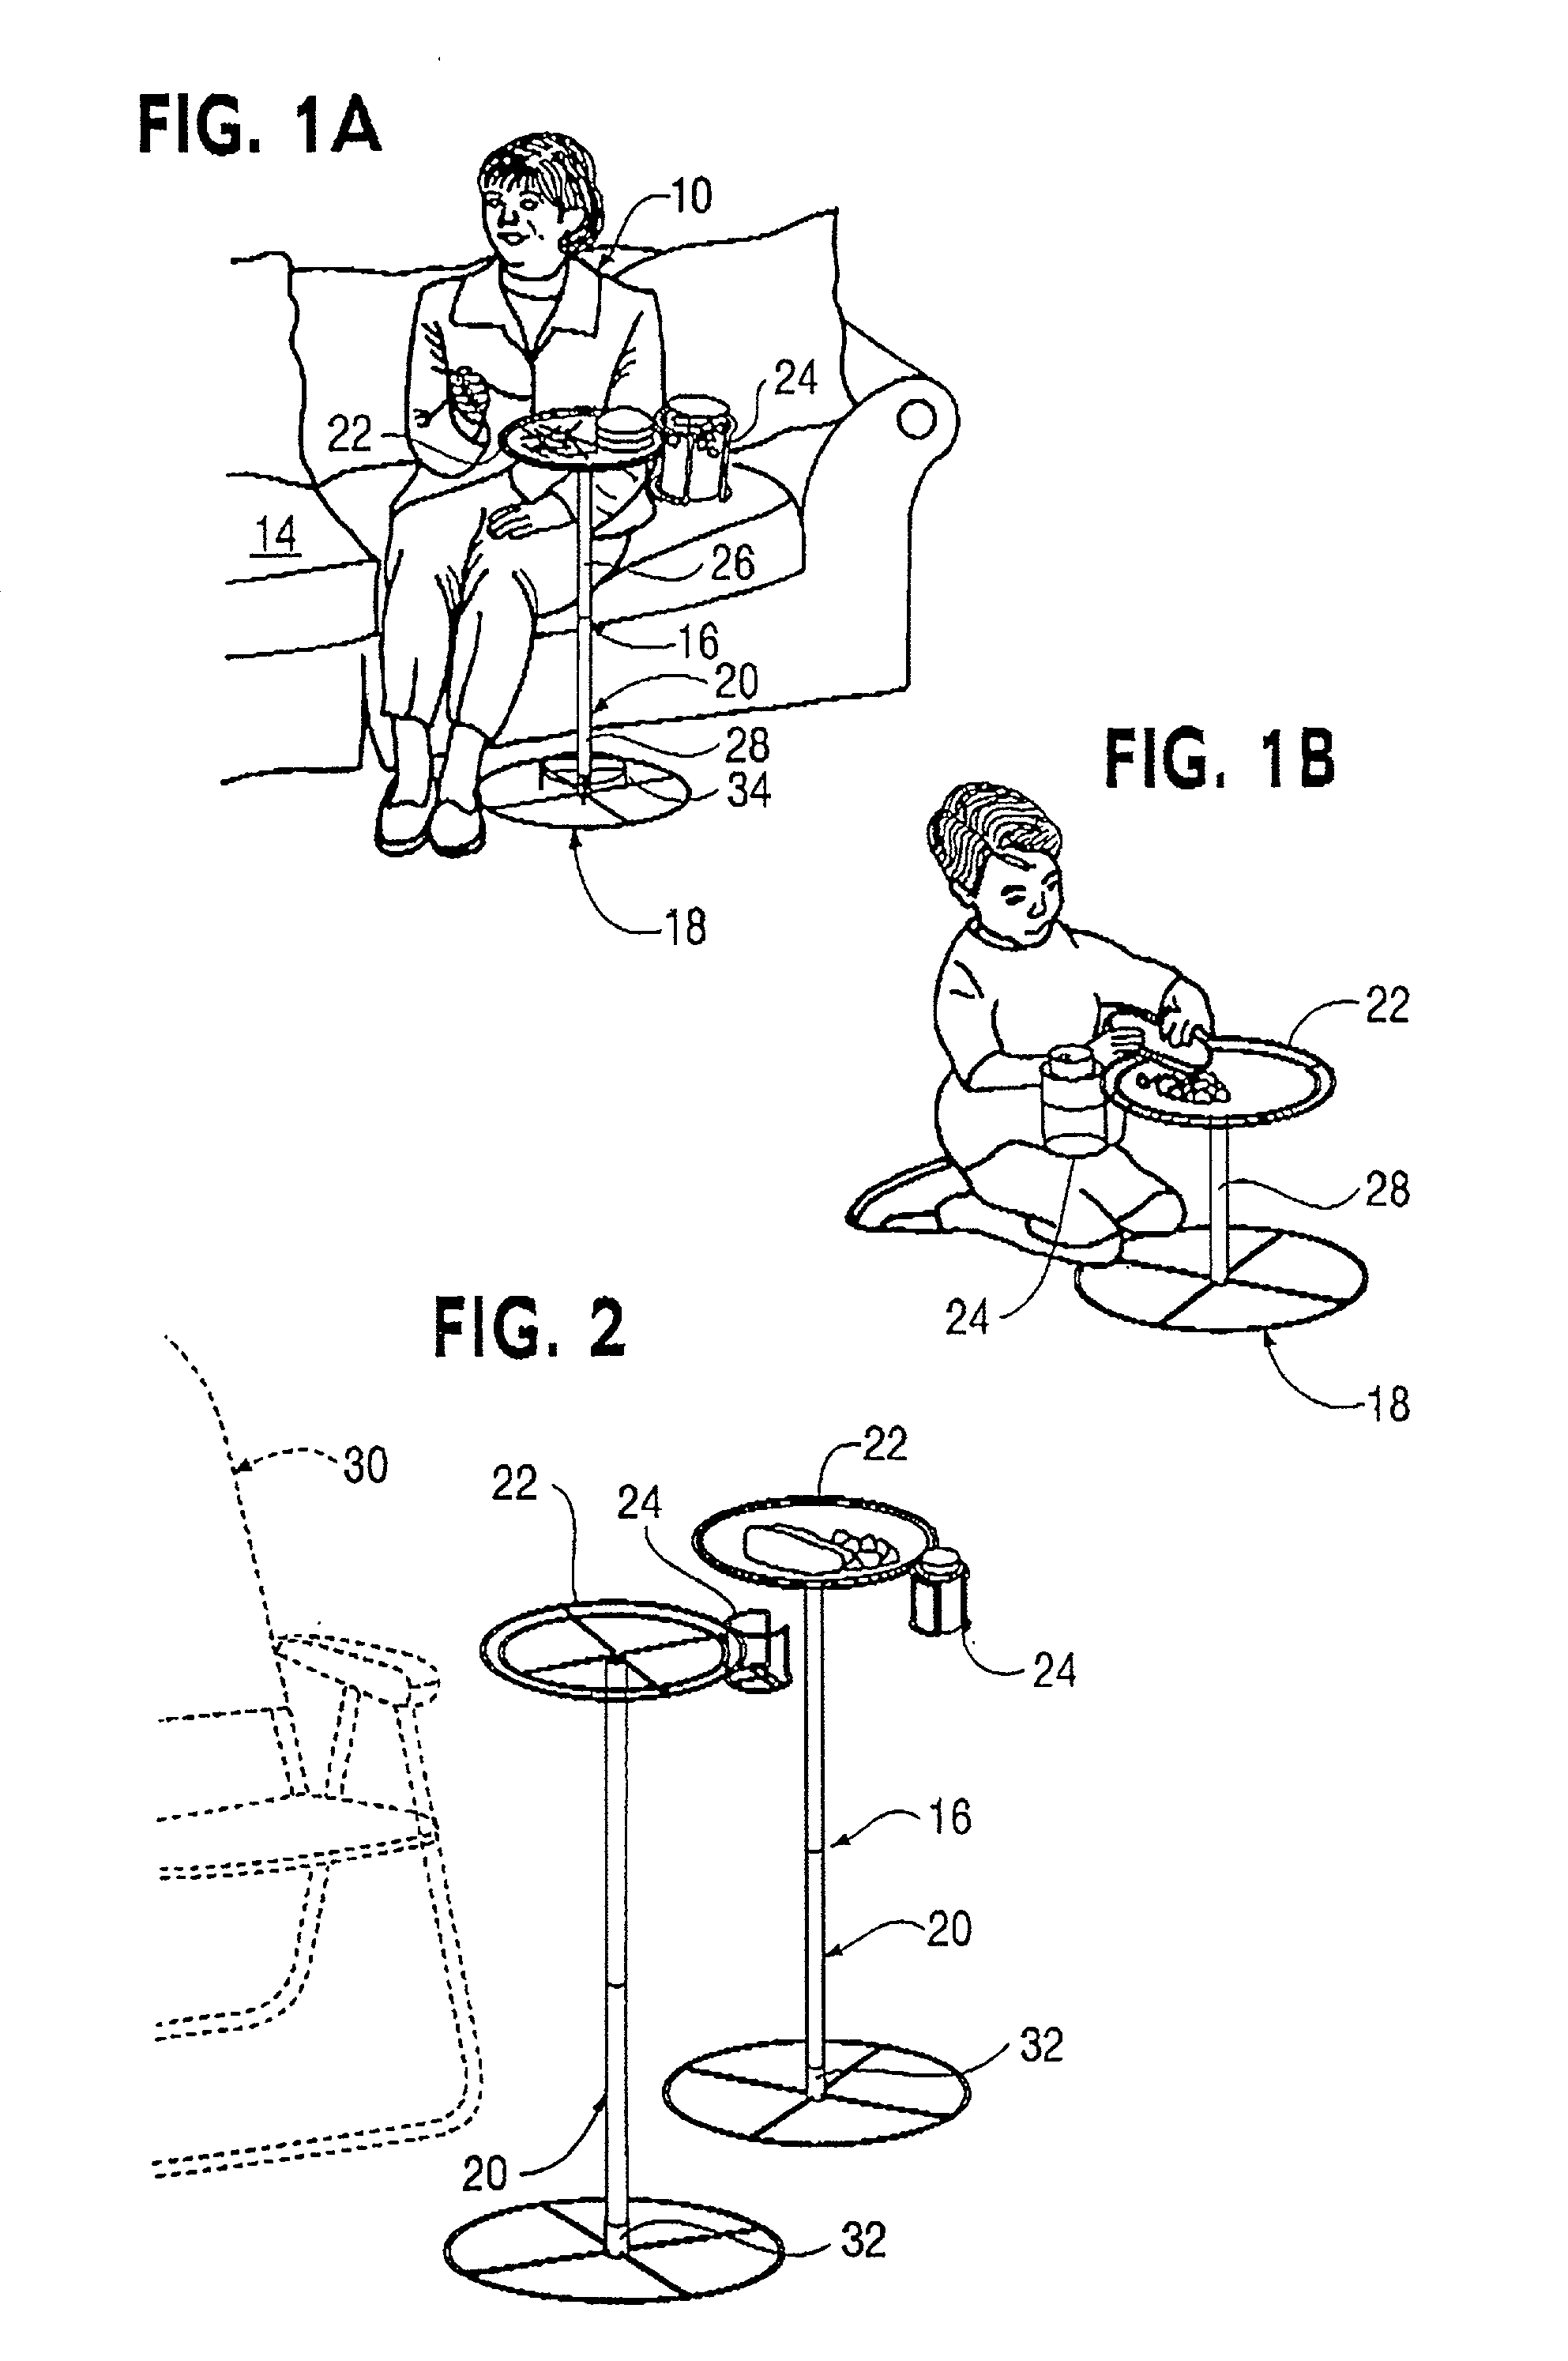 Portable, personal table system